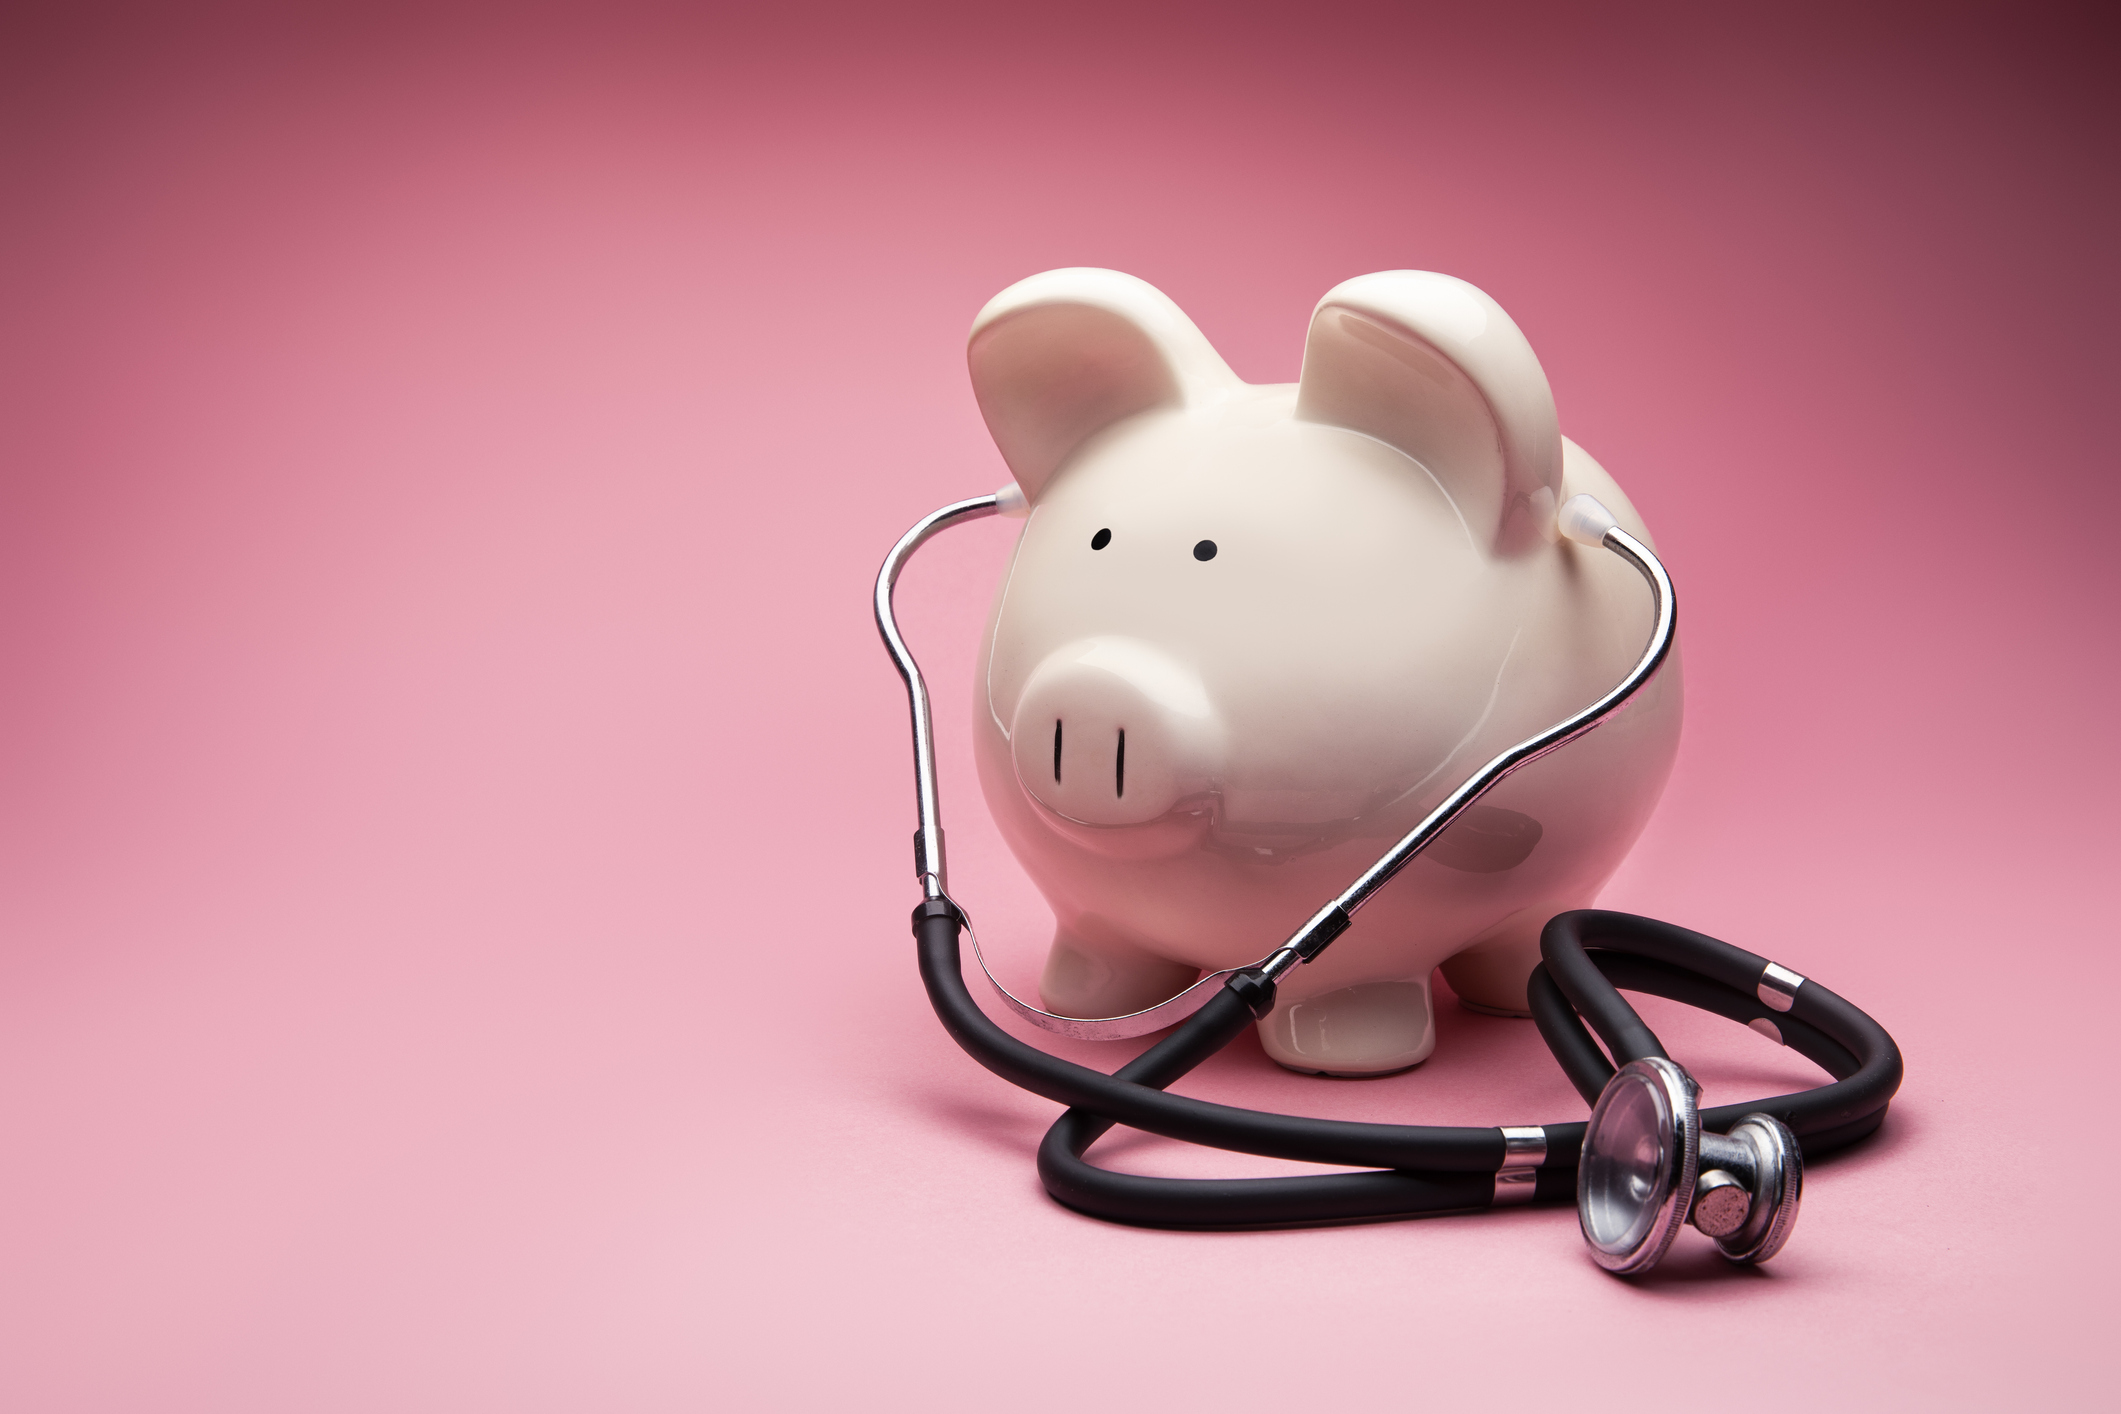 image of a piggy bank with a stethoscope on amid a pink background.